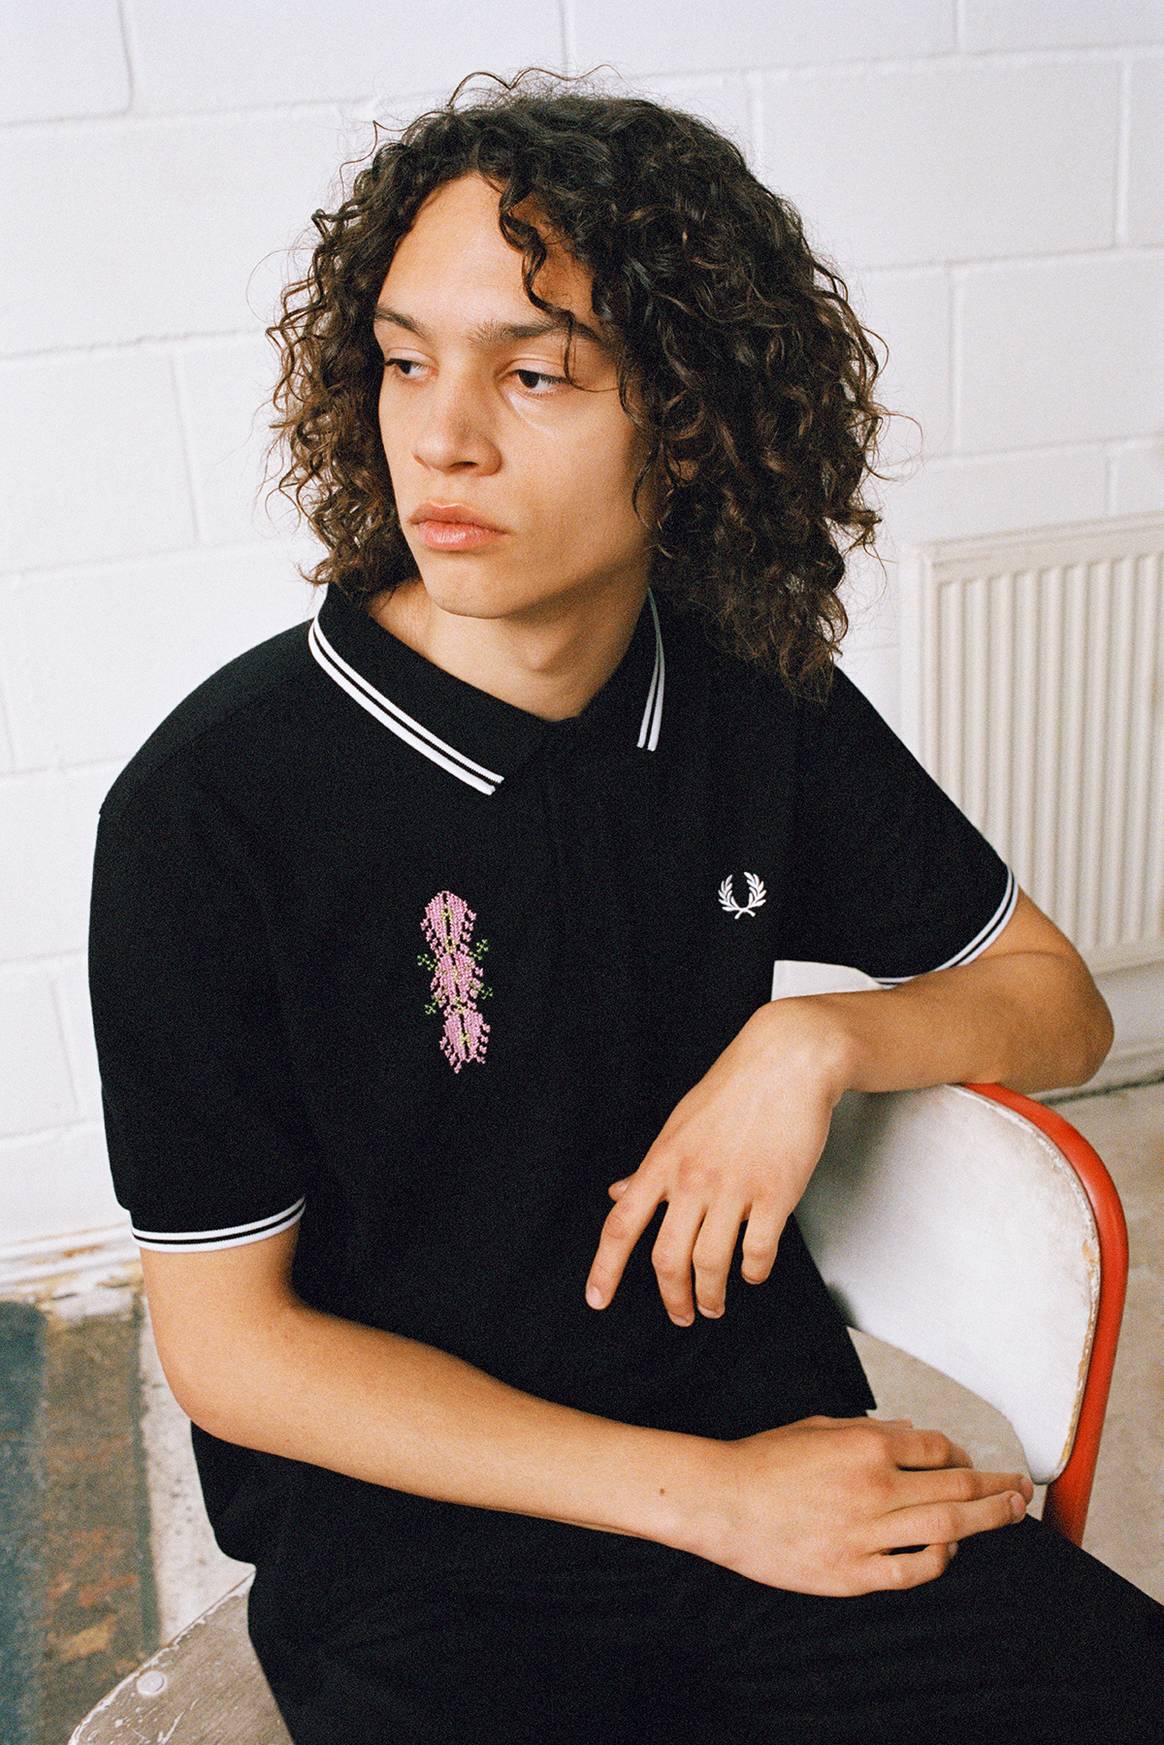 Image: Fred Perry x Adish